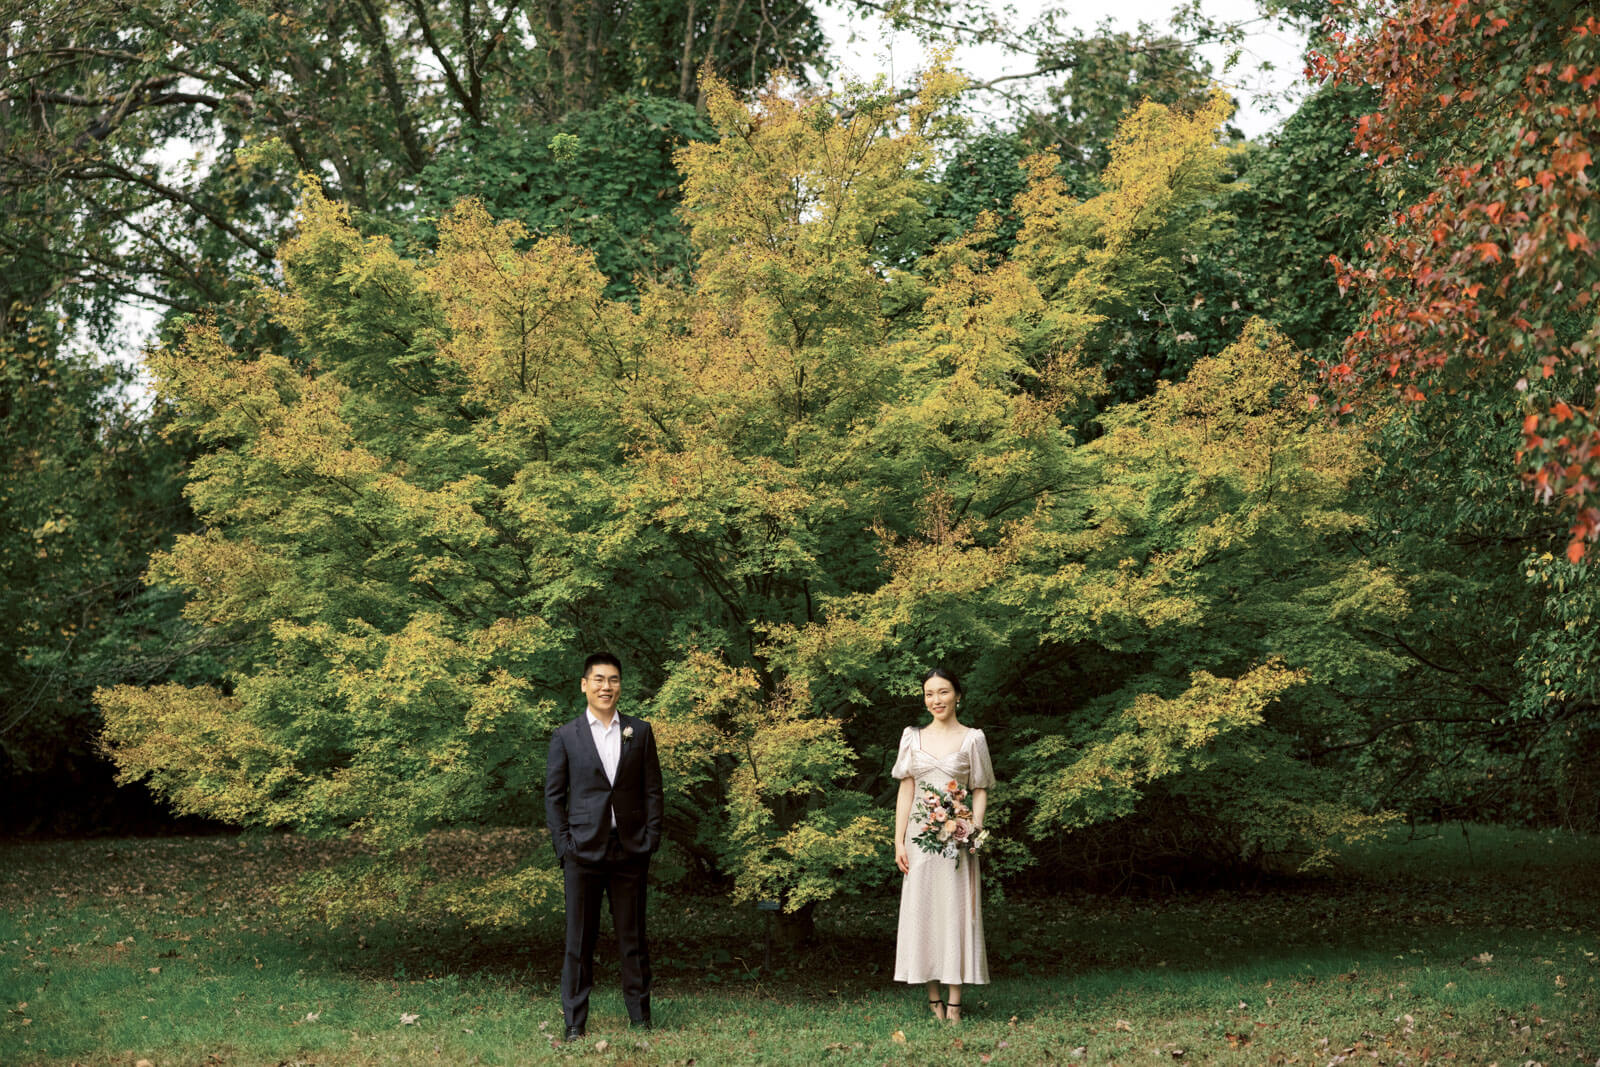 The engaged couple is standing a meter apart, amongst the beautiful fall foliage. Image by Jenny Fu Studio